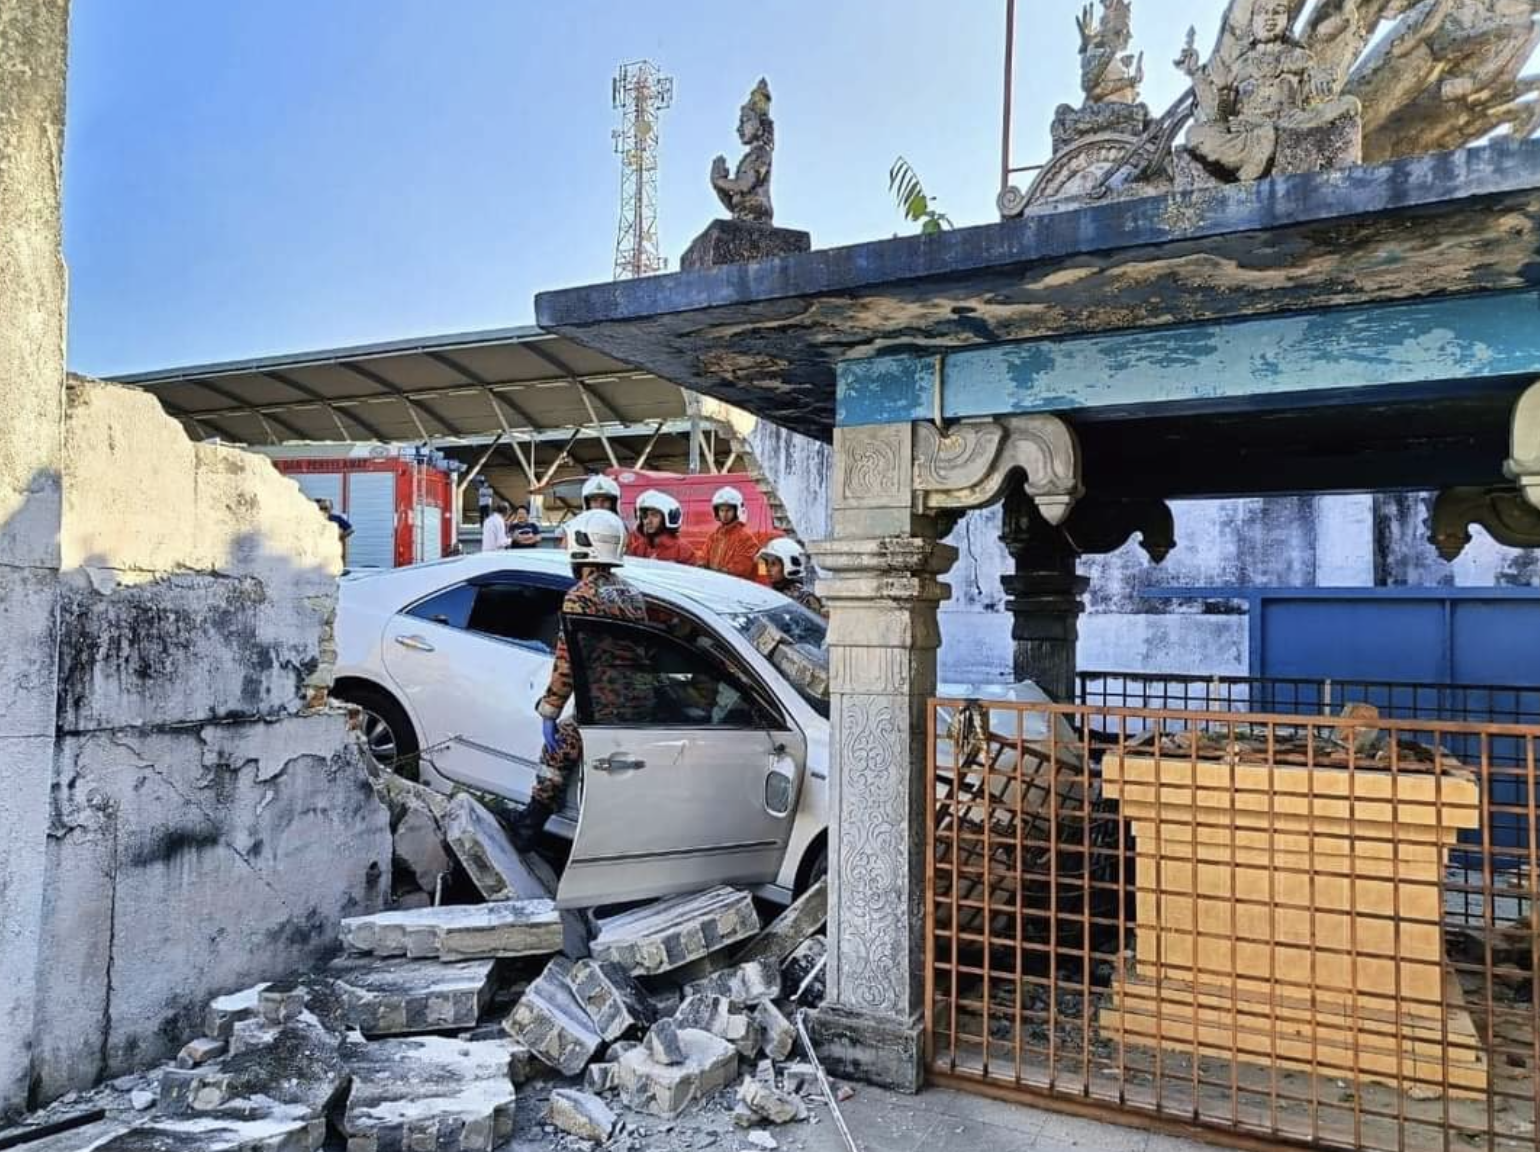 55yo m'sian man dies of heart attack while driving, car loses control & crashes into temple | weirdkaya